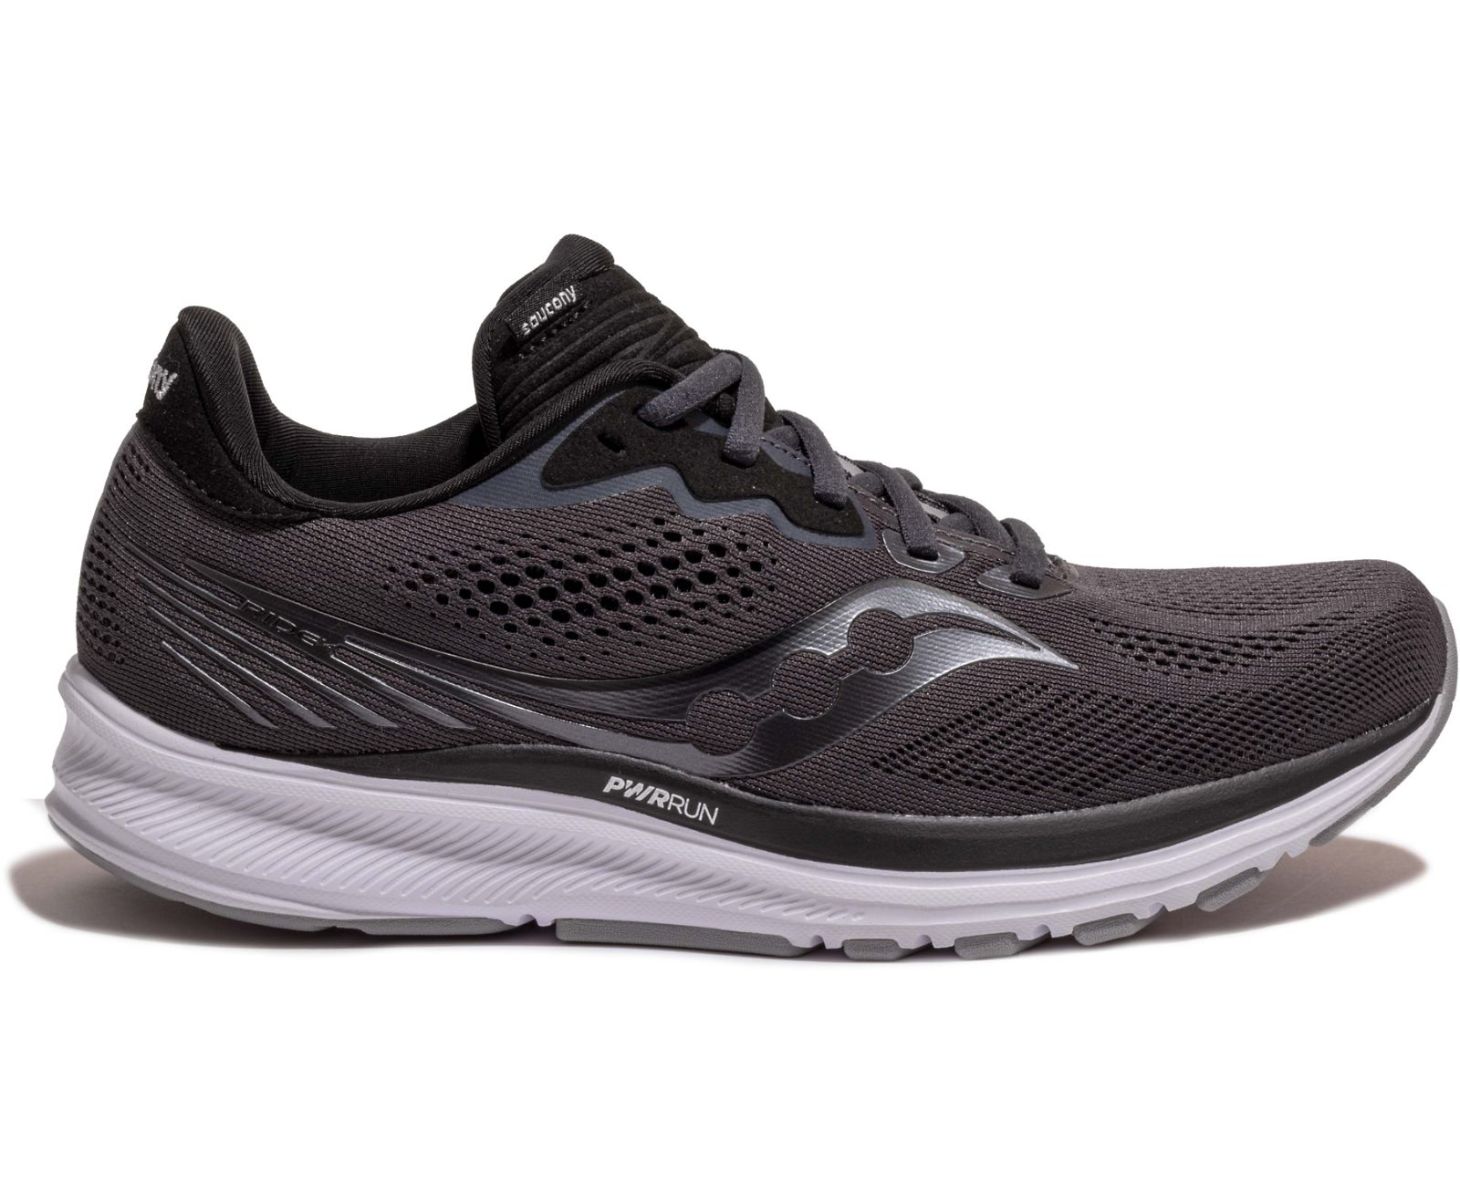 neutral running shoes for women